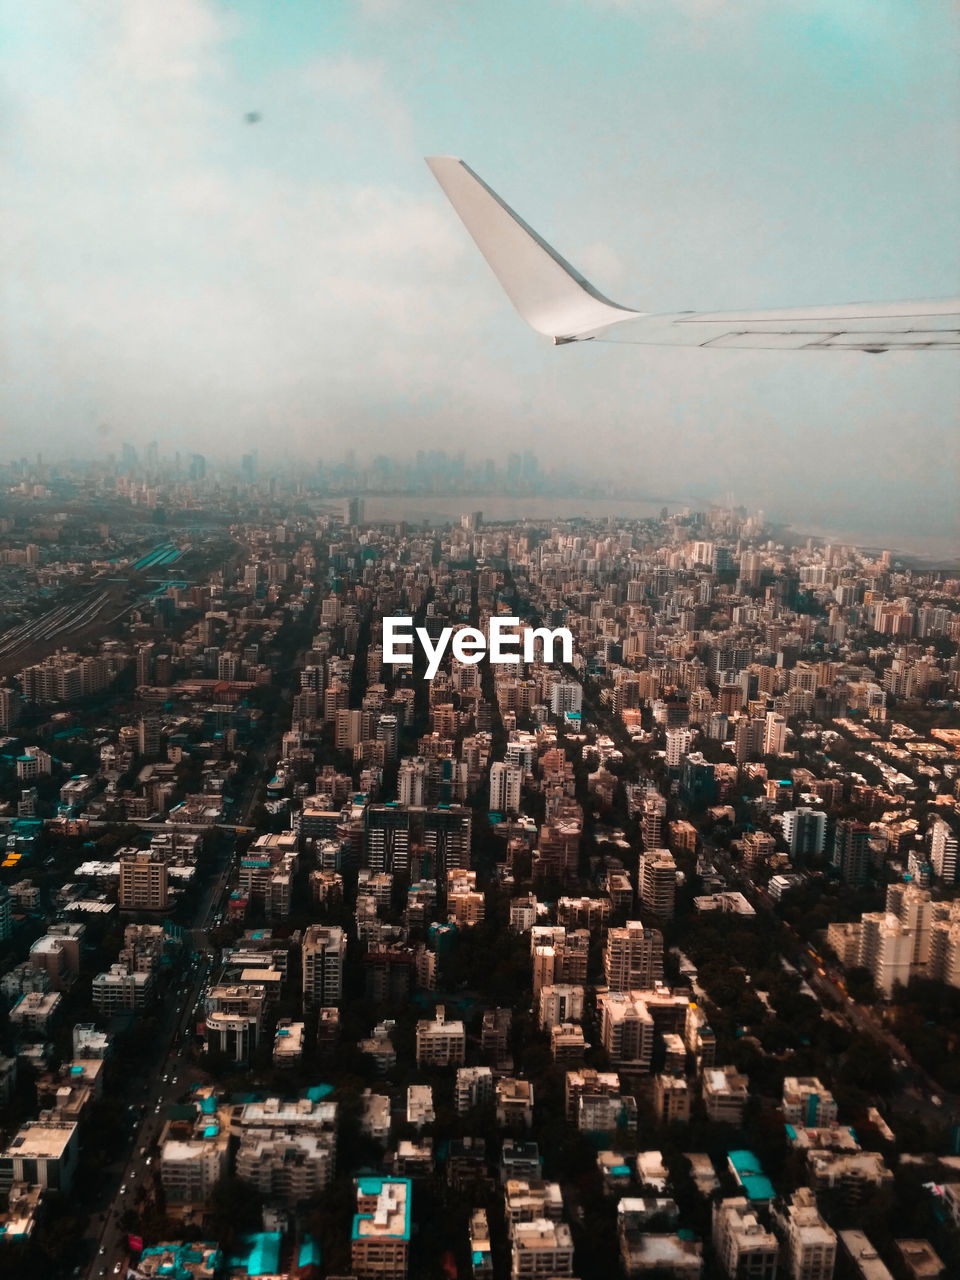 View of cityscape seen through airplane